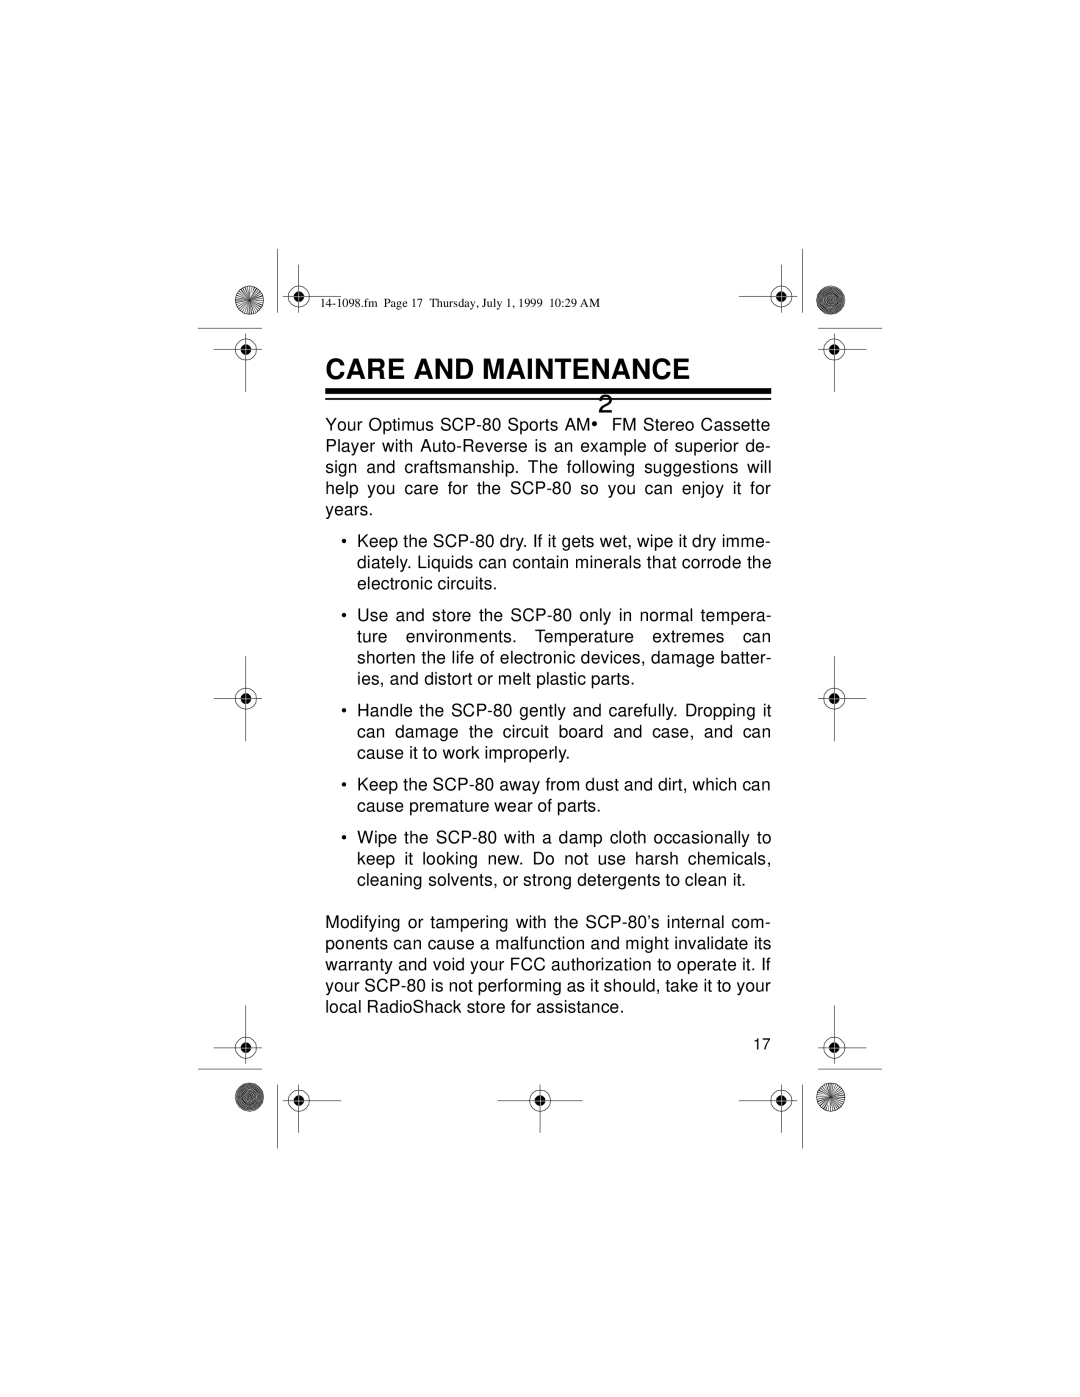 Optimus 14-1098, SCP-80 owner manual Care And Maintenance, fmPage 17 Thursday, July 1, 1999 10 29 AM 